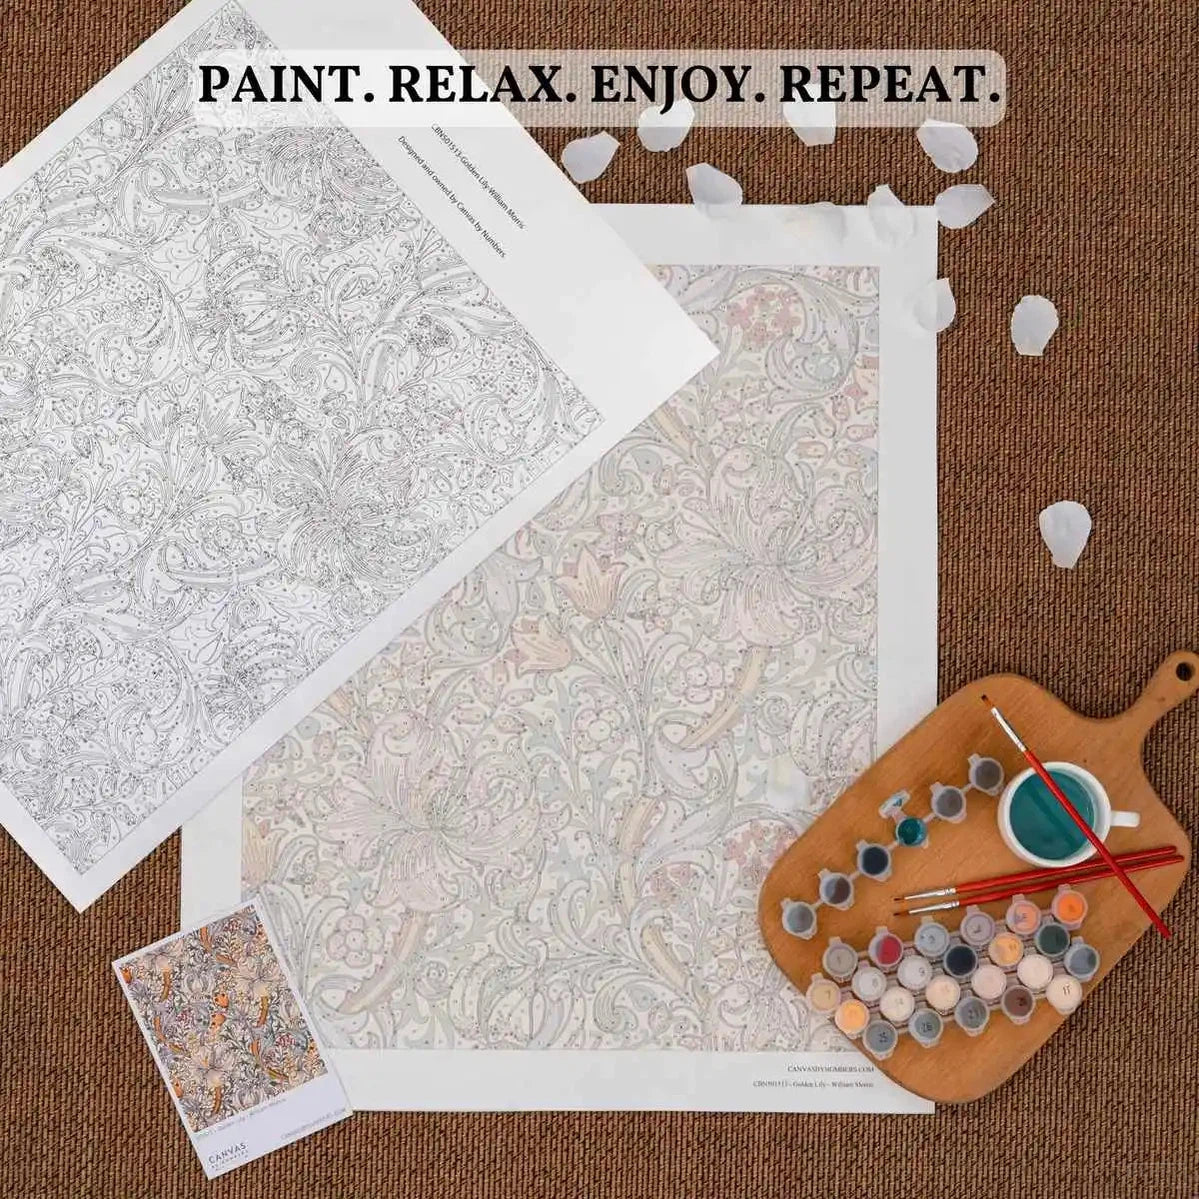 Acceptance - Kaleidoscope Mandala Art Paint by Numbers Kit-Experience serenity with our 'Acceptance' kaleidoscope mandala paint by numbers kit for adults. Perfect for all ages, it is a creative gift for any occasion. -Canvas by Numbers